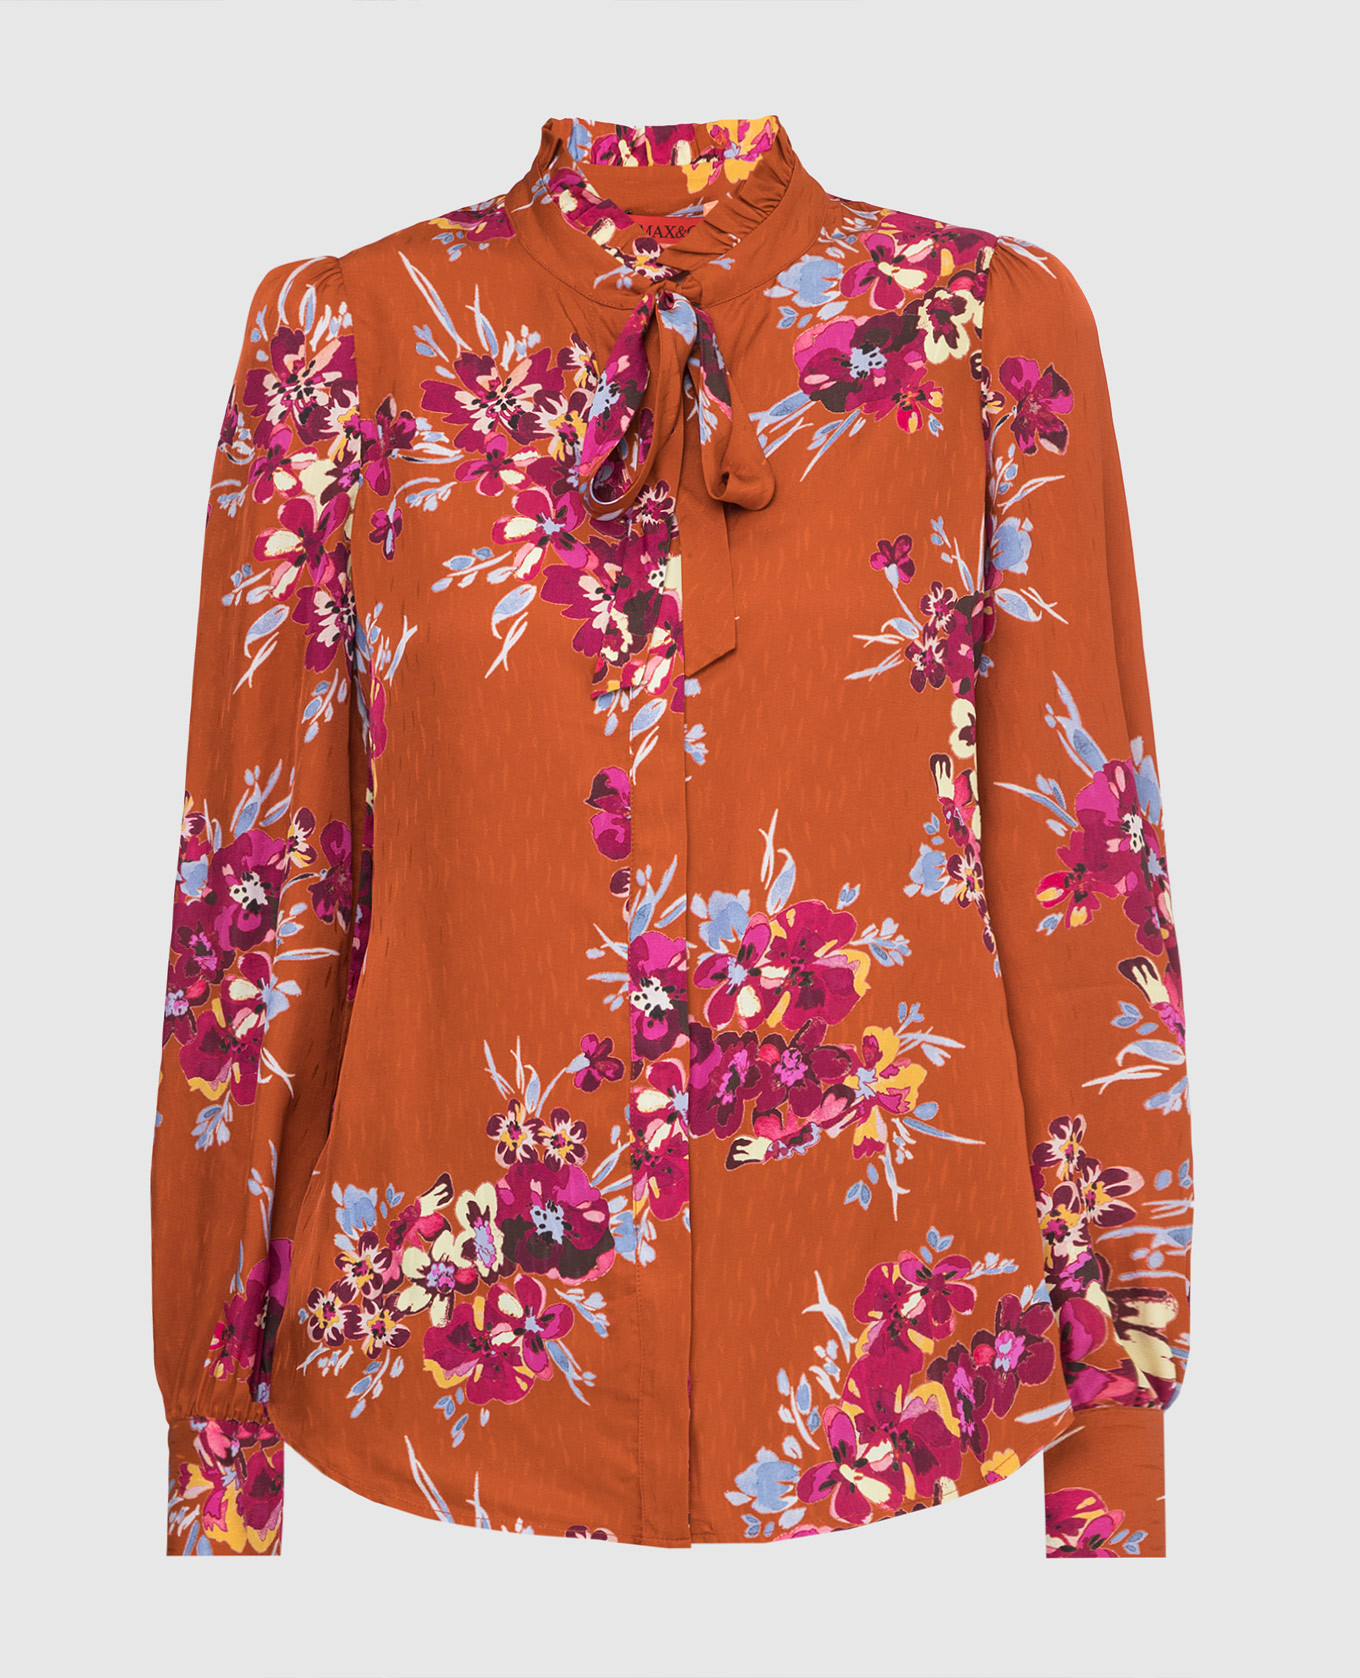 Max & Co - Gladiolo blouse in floral print GLADIOLO buy at Symbol